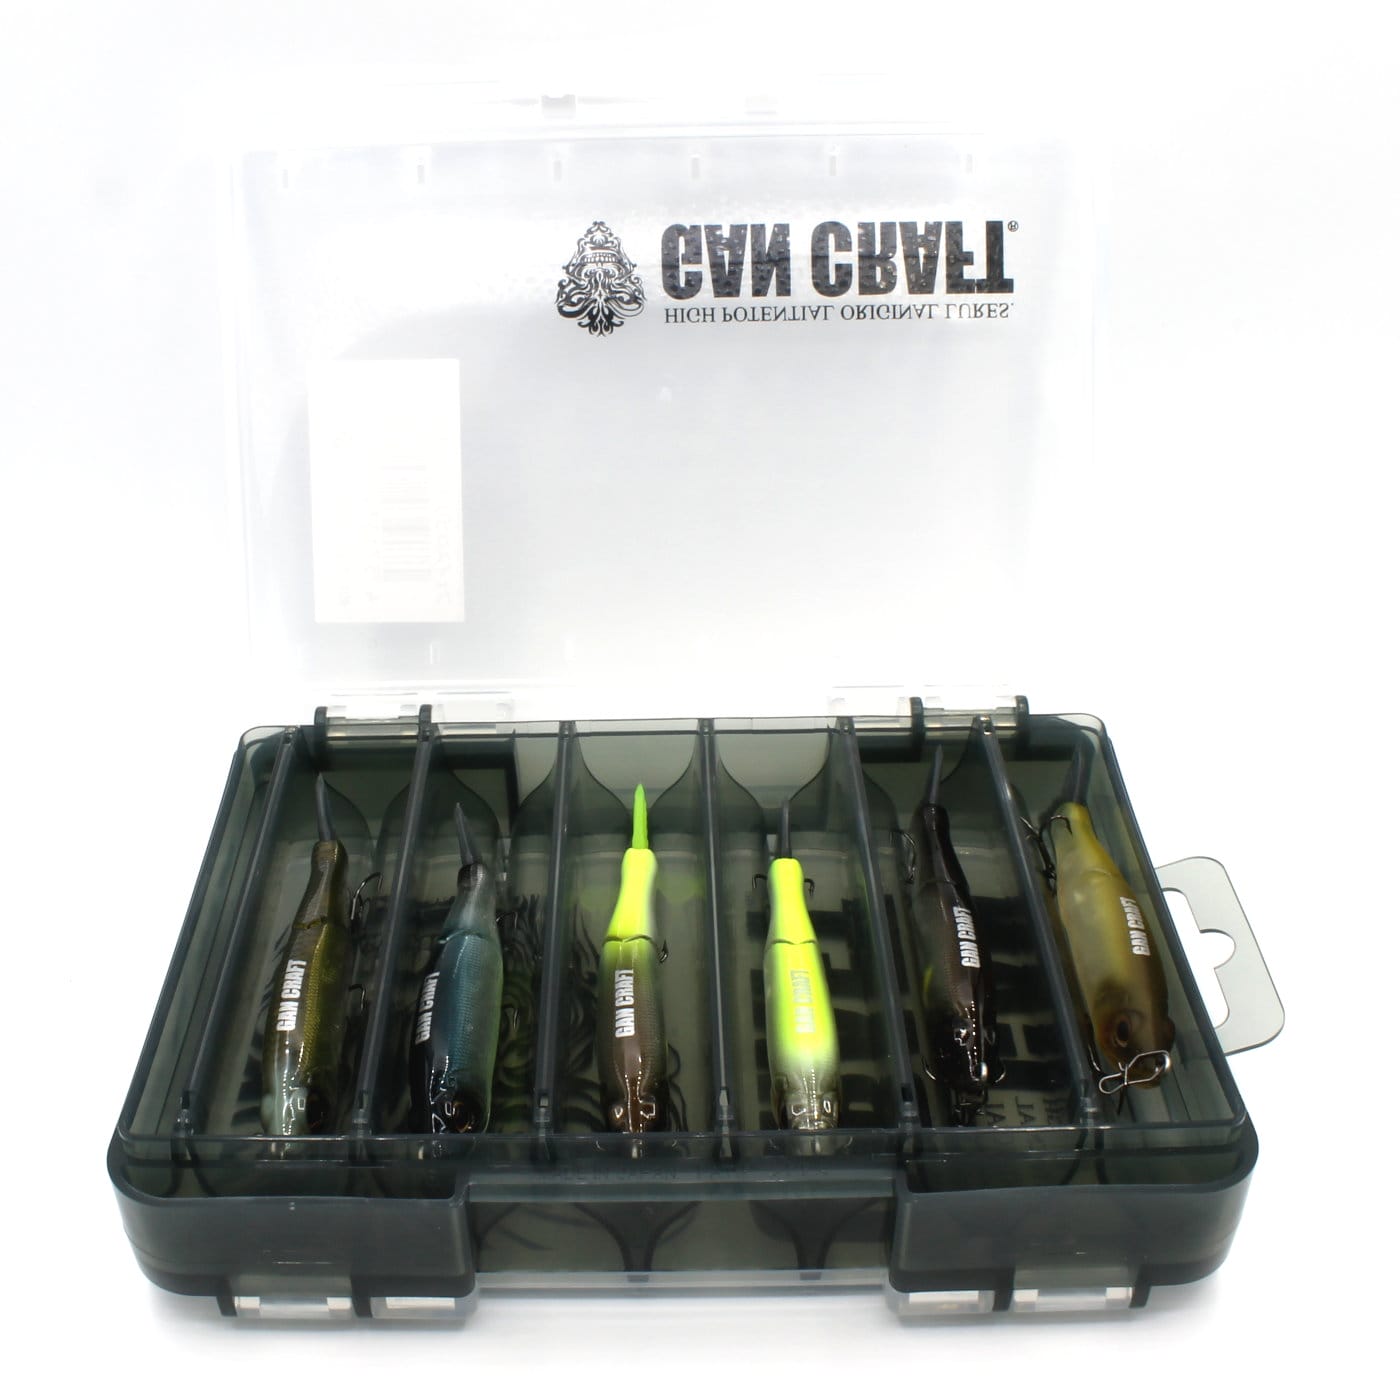 Gan Craft Small Reversible Box - Bait Finesse Empire, Craft Tackle